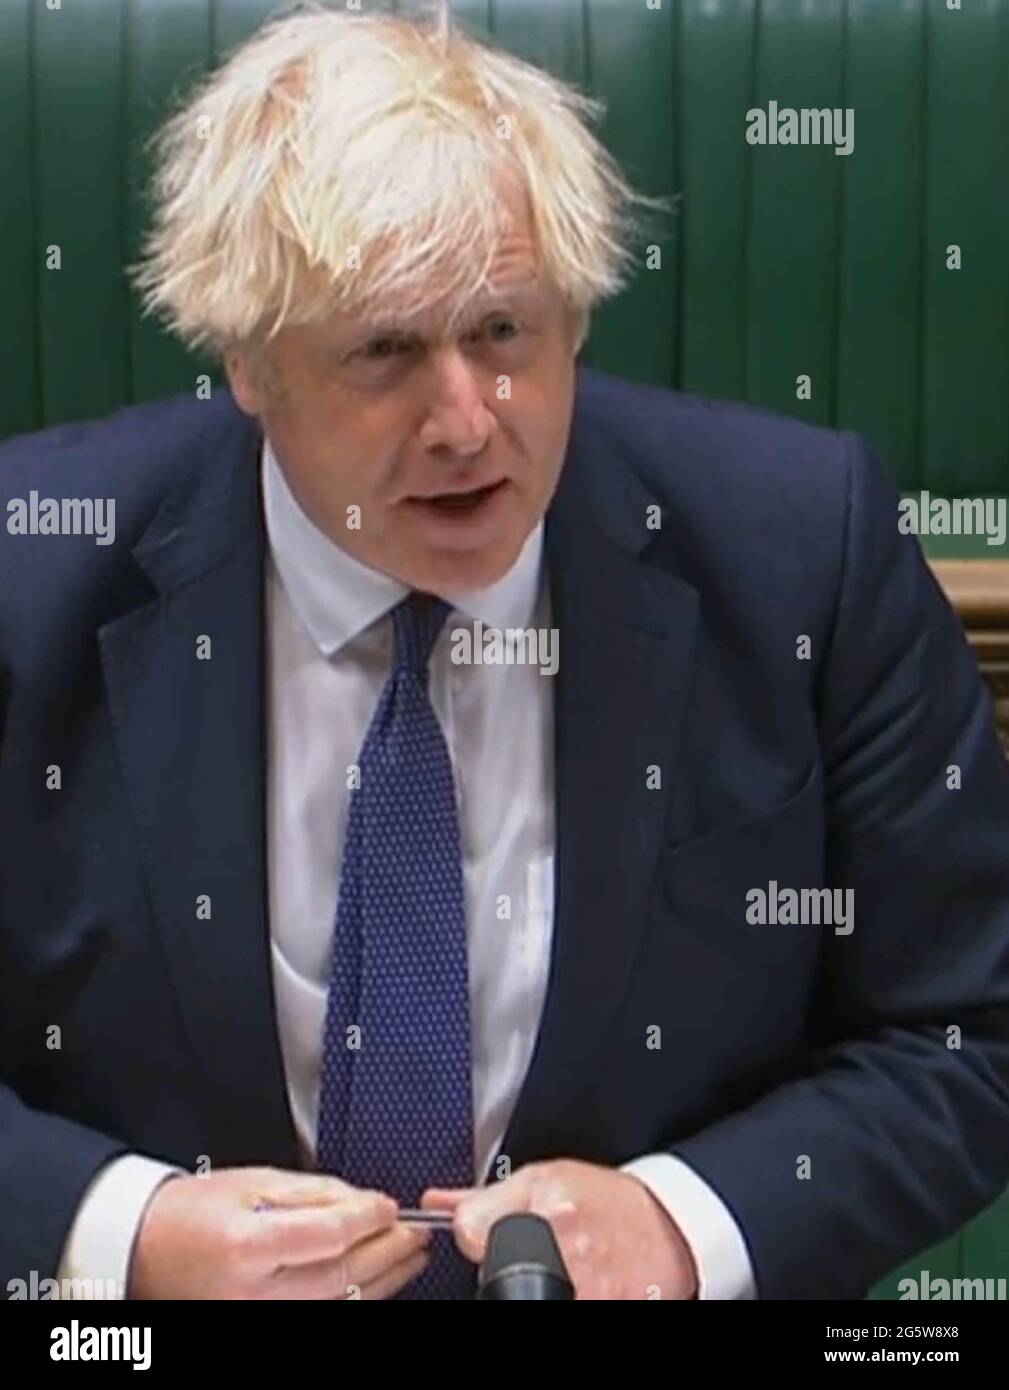 Prime Minister Boris Johnson speaks during Prime Minister's Questions in the House of Commons, London. Stock Photo